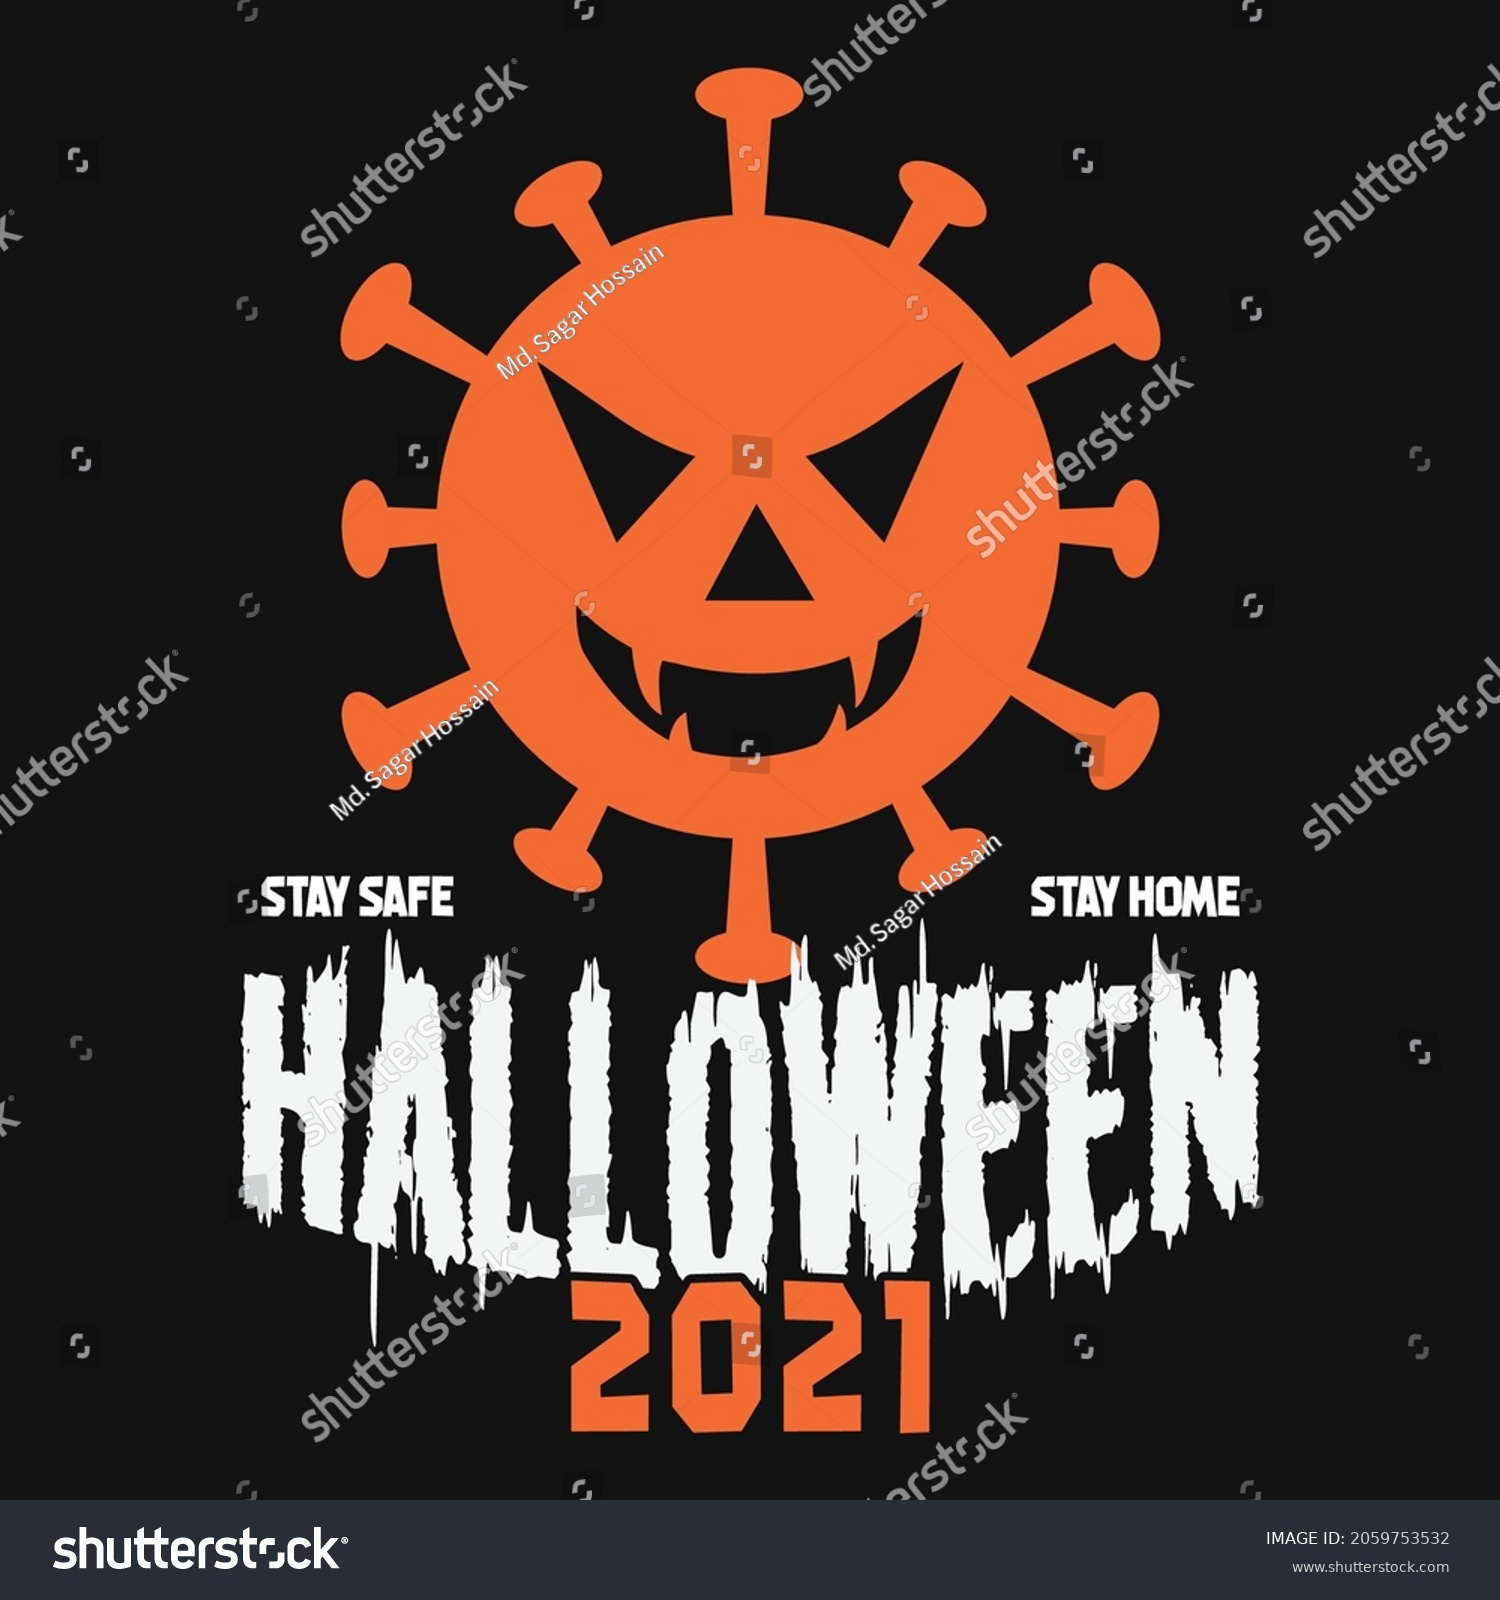 SVG of Stay Safe Stay Home, Halloween 2021 Svg T-shirt Design. Make your Halloween party with this funny Covid Halloween design. svg